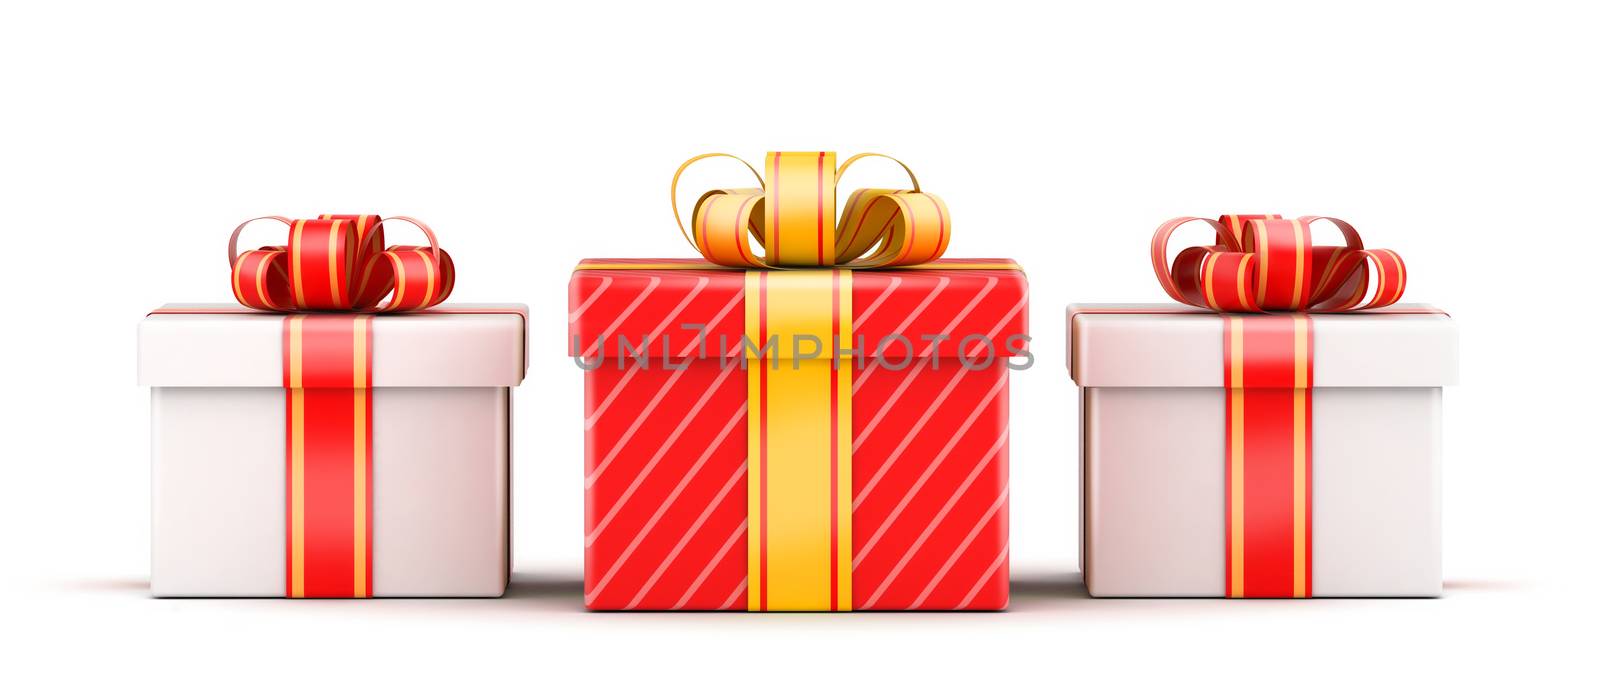 Three gifts - white and red with ribbons selection concept